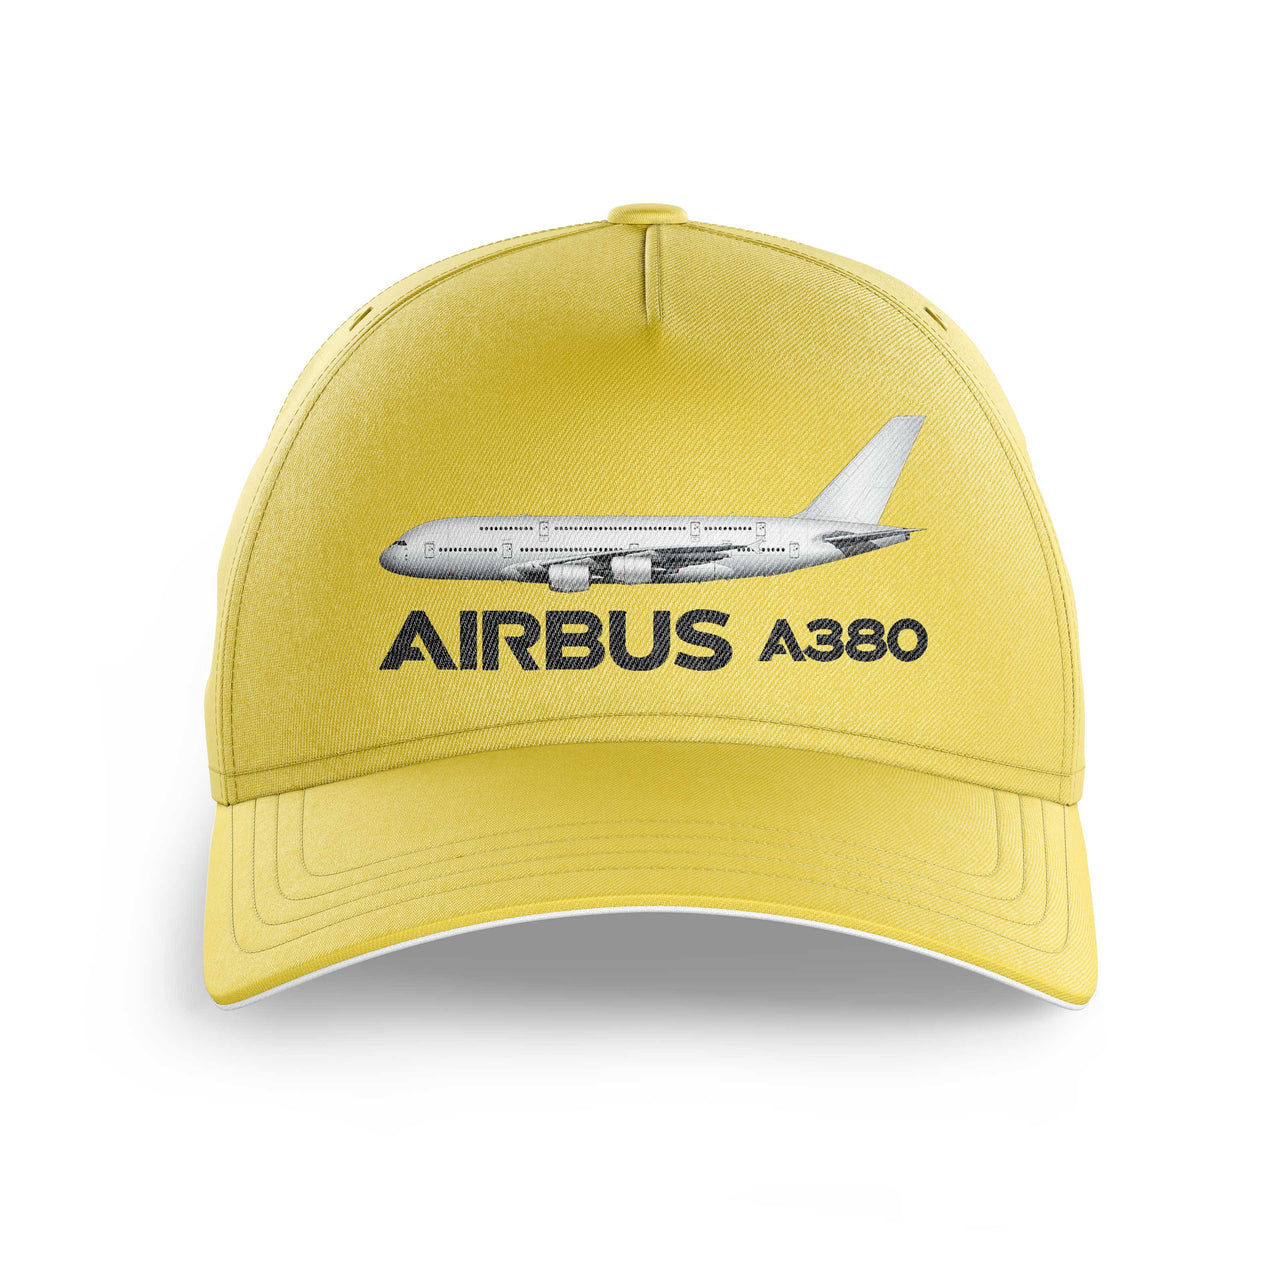 The Airbus A380 Printed Hats